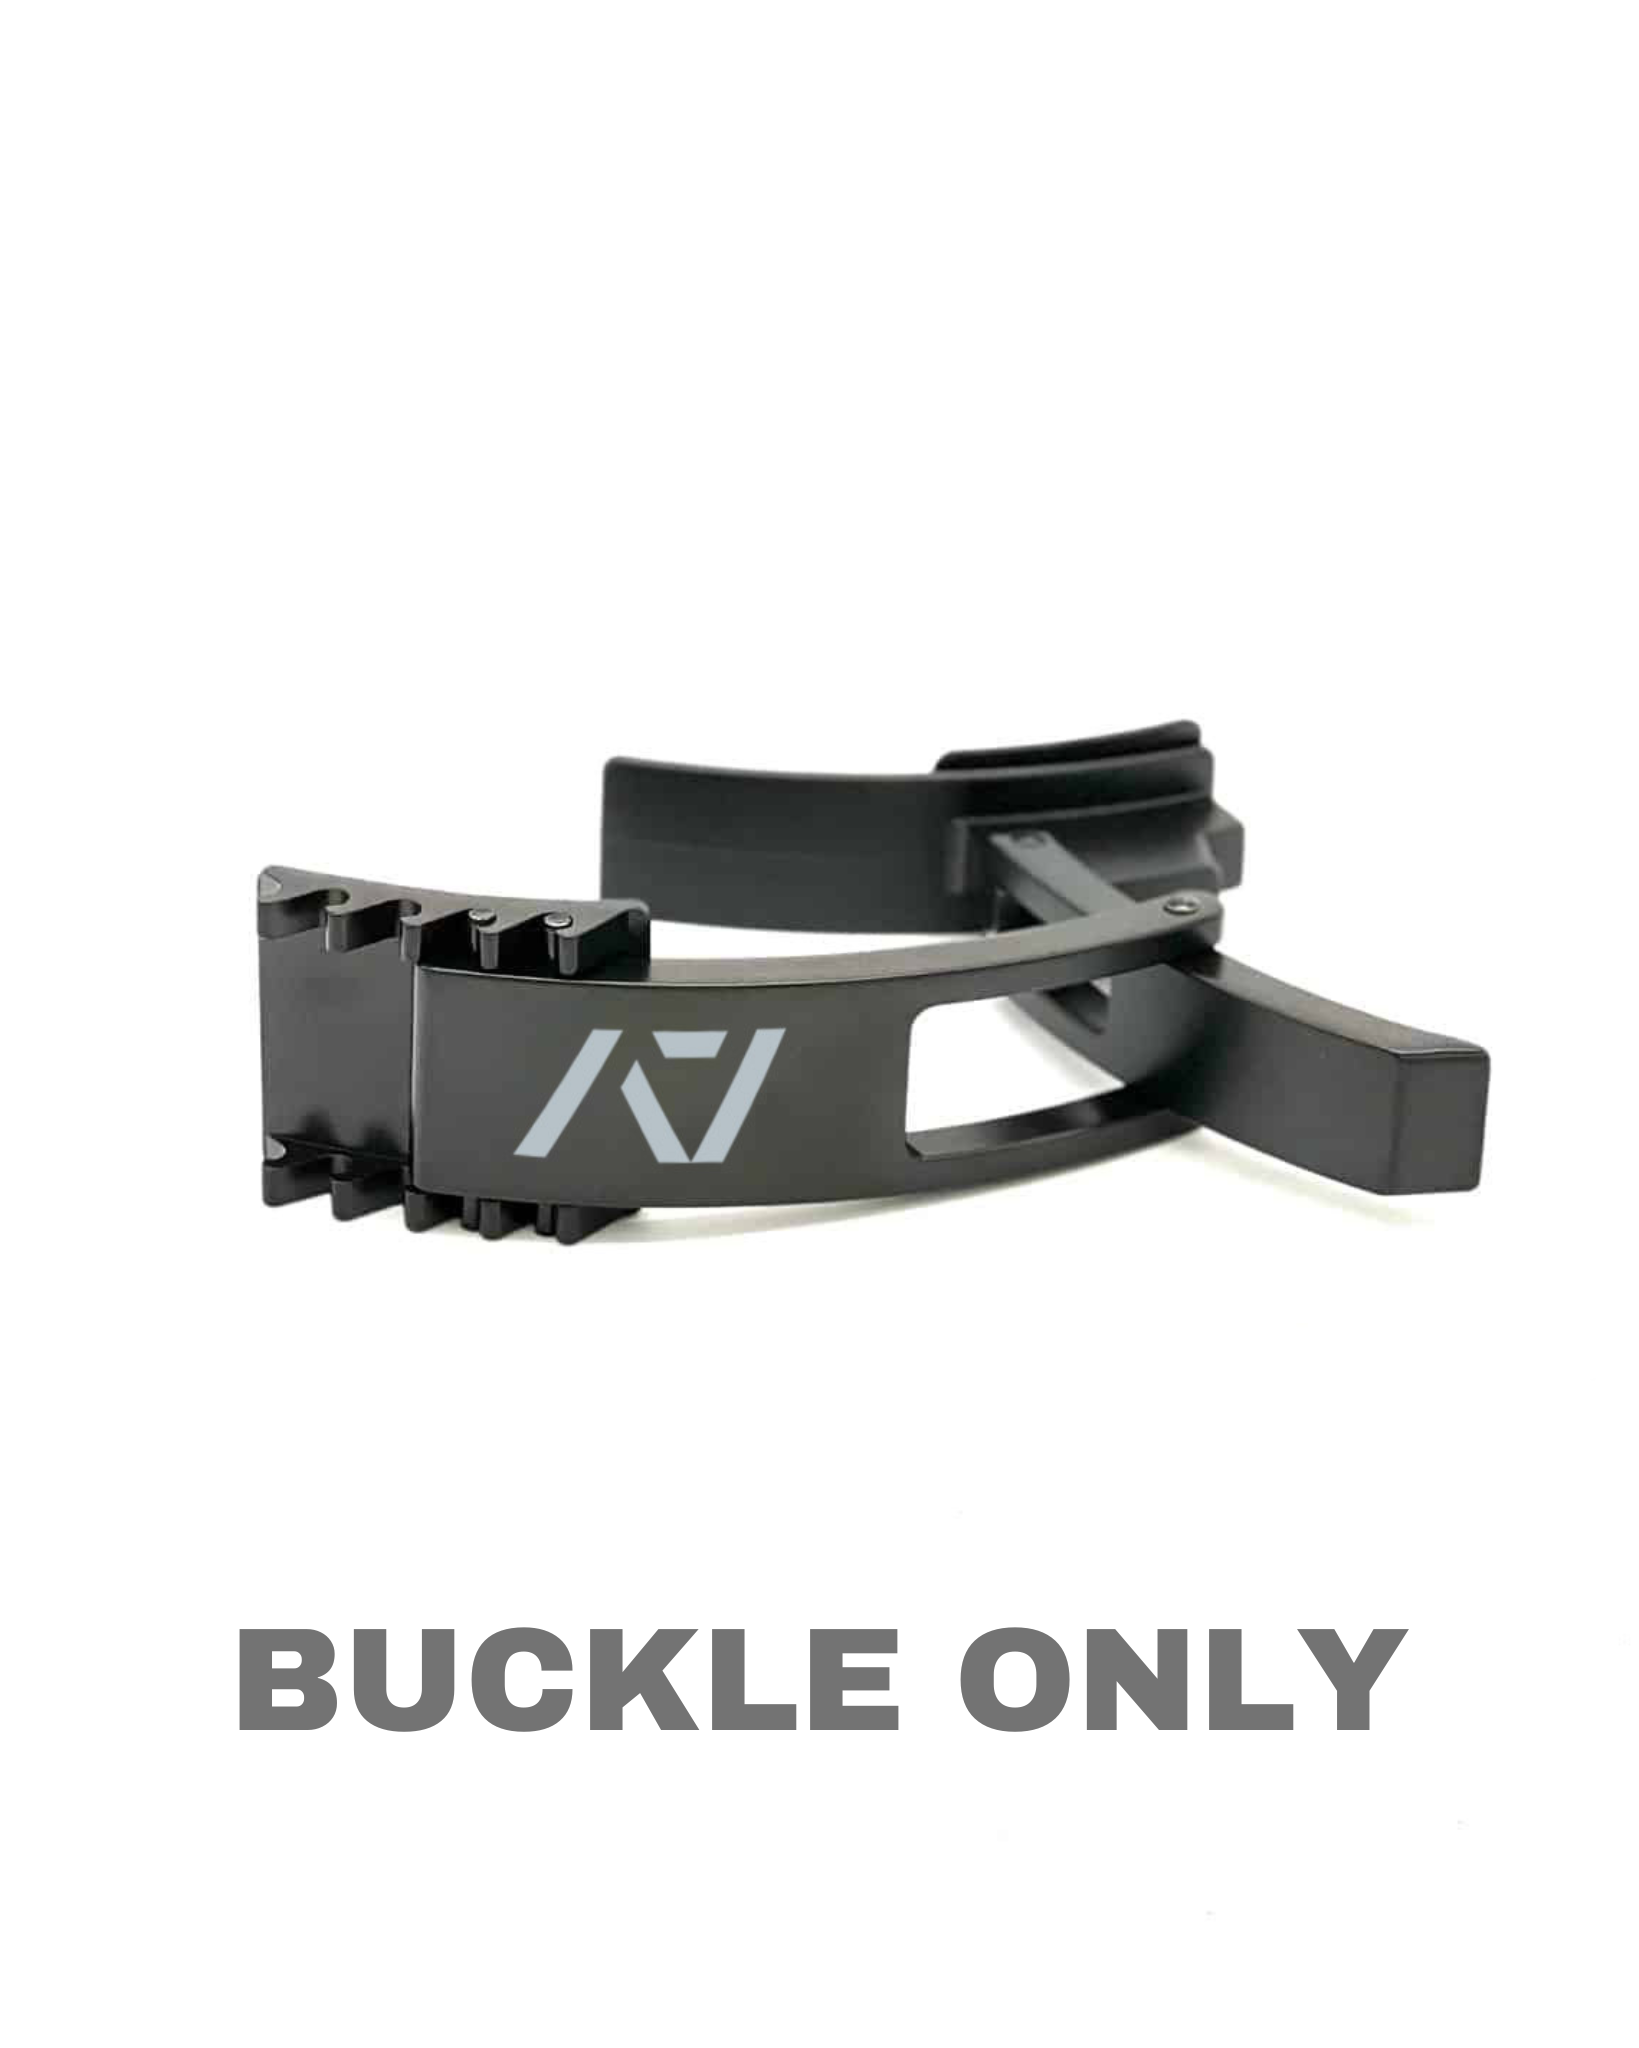 A7 PAL Lever Belt Review: The Best IPF-Approved Belt?